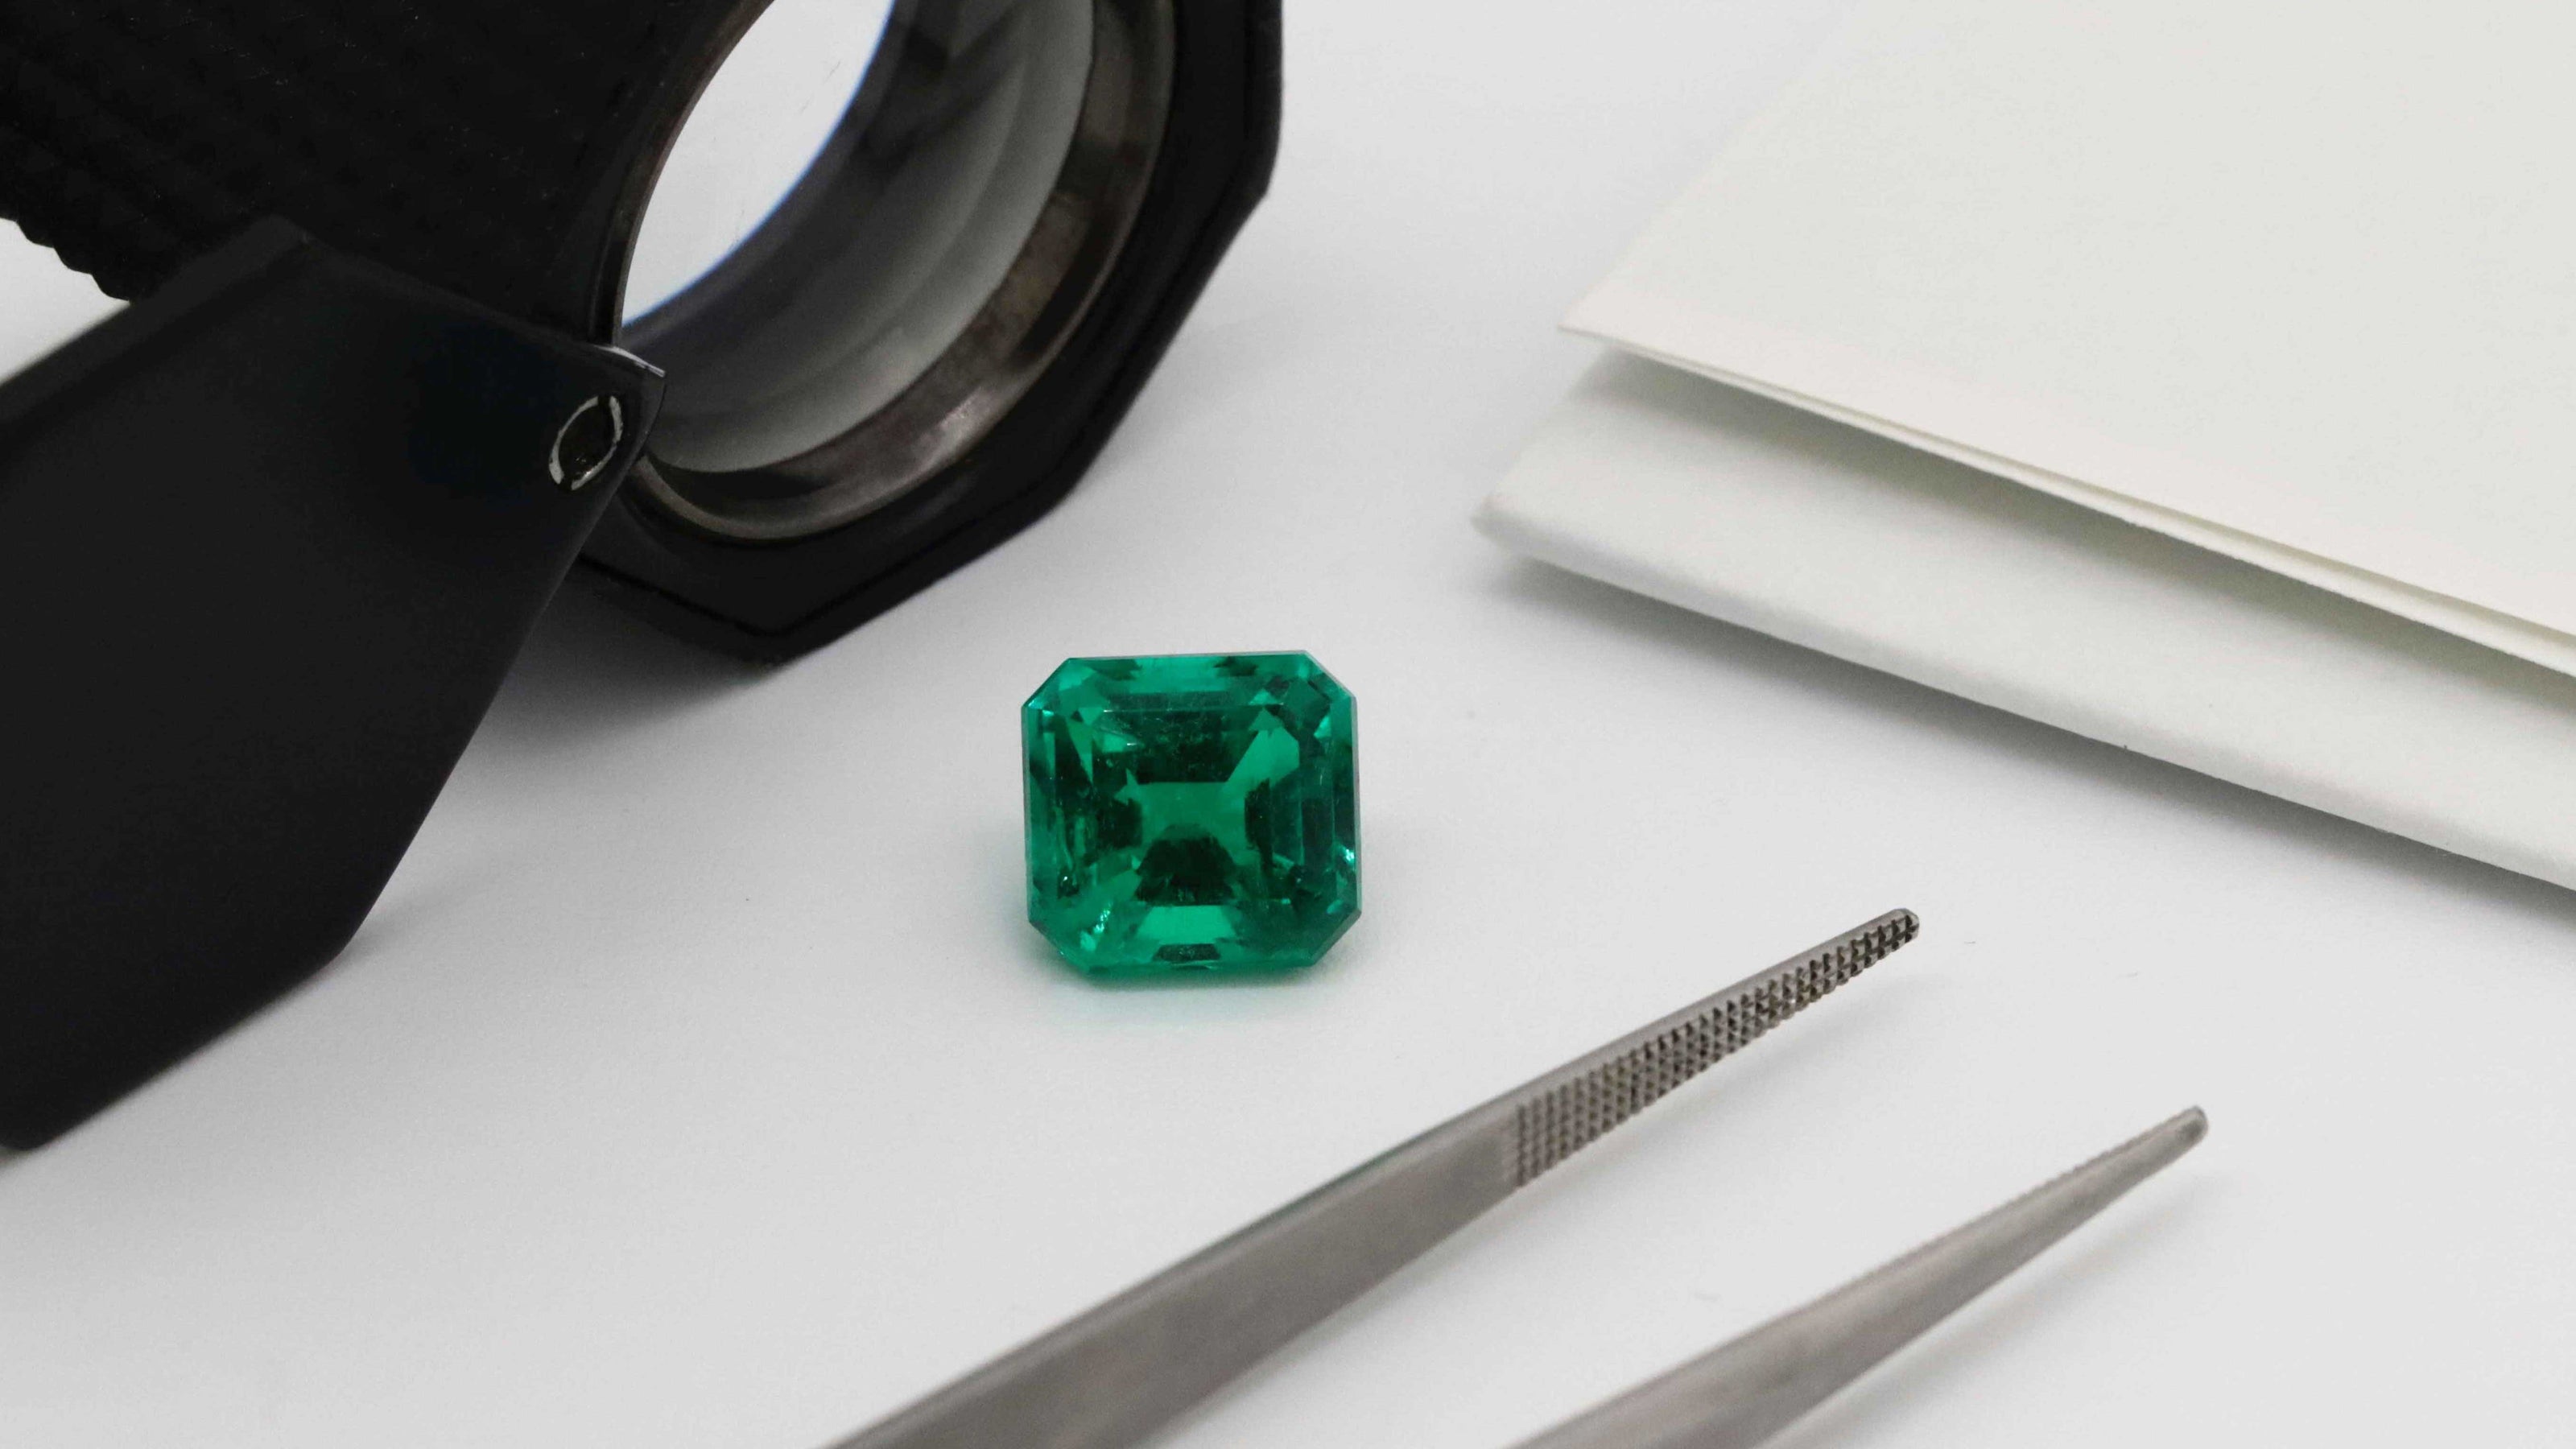 This is an image of emerald. L Line goes through a thorough process of selecting high quality diamonds and gemstones for jewelry manufacturing. VS Diamonds, Emerald, Ruby, Sapphire, Morganite and many more natural stones.